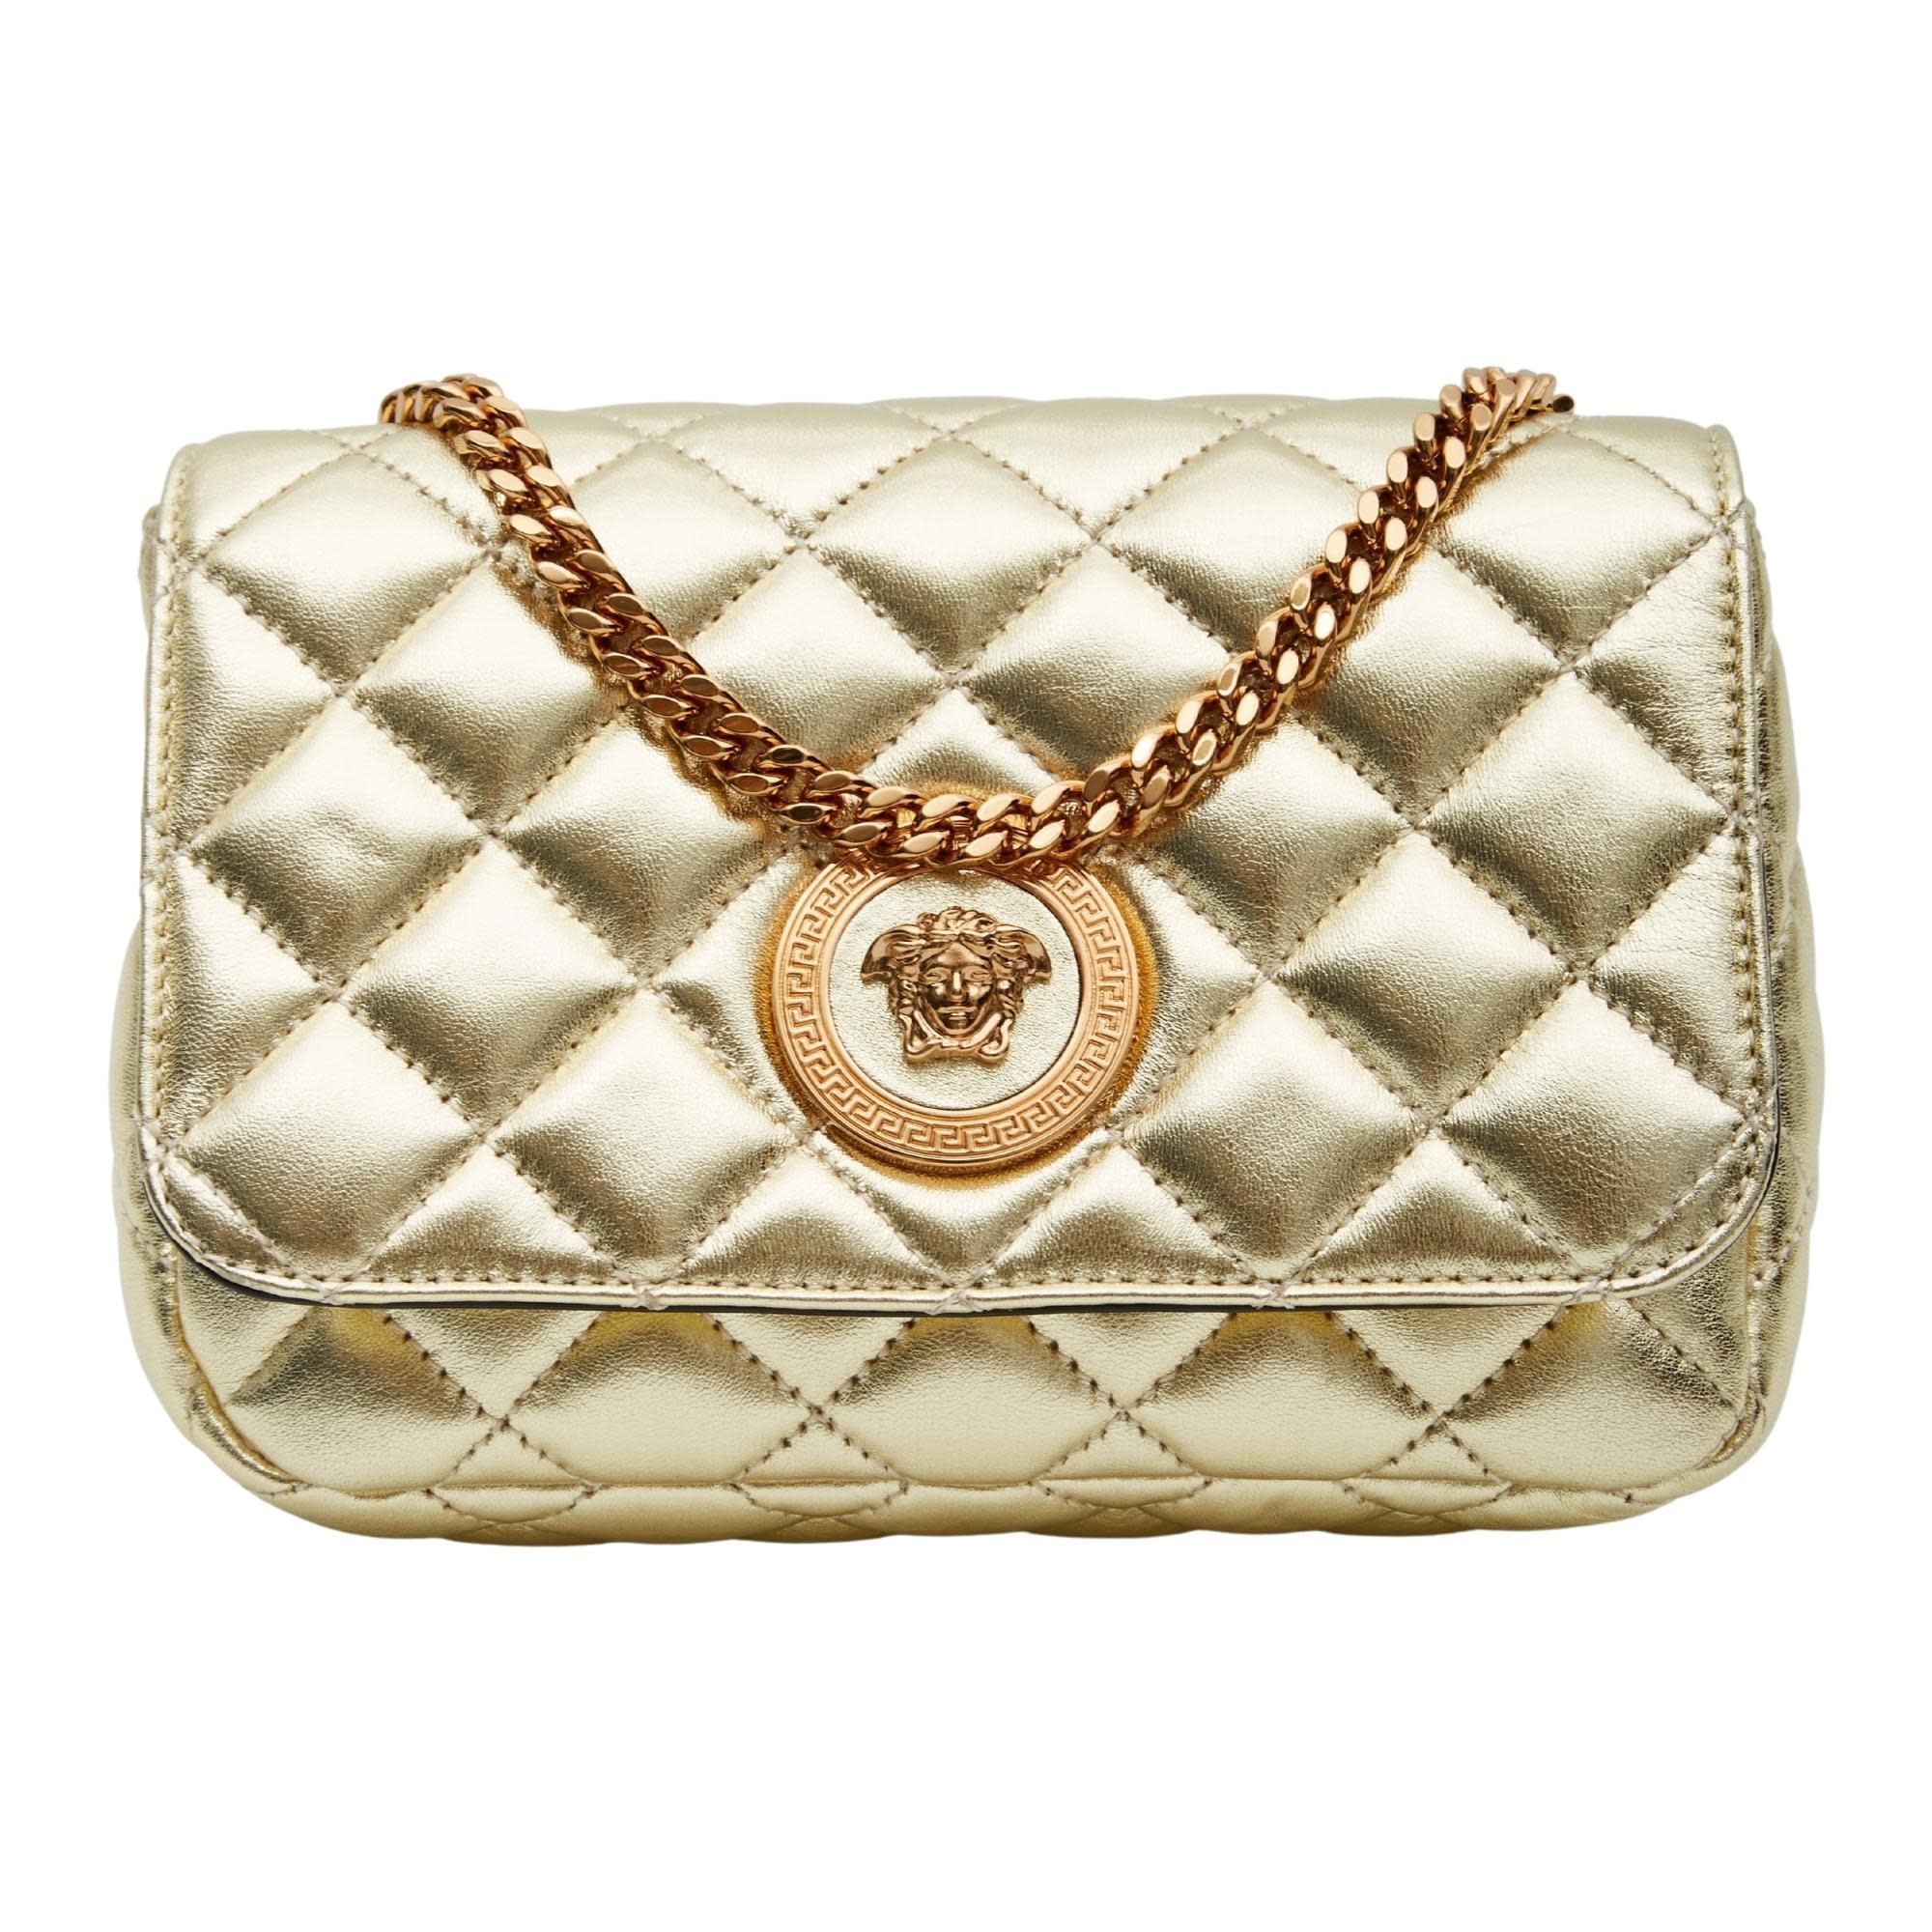 VERSACE QUILTED LEATHER GOLD MEDUSA HEAD SMALL FLAP CROSSBODY BAG -  CRTBLNCHSHP